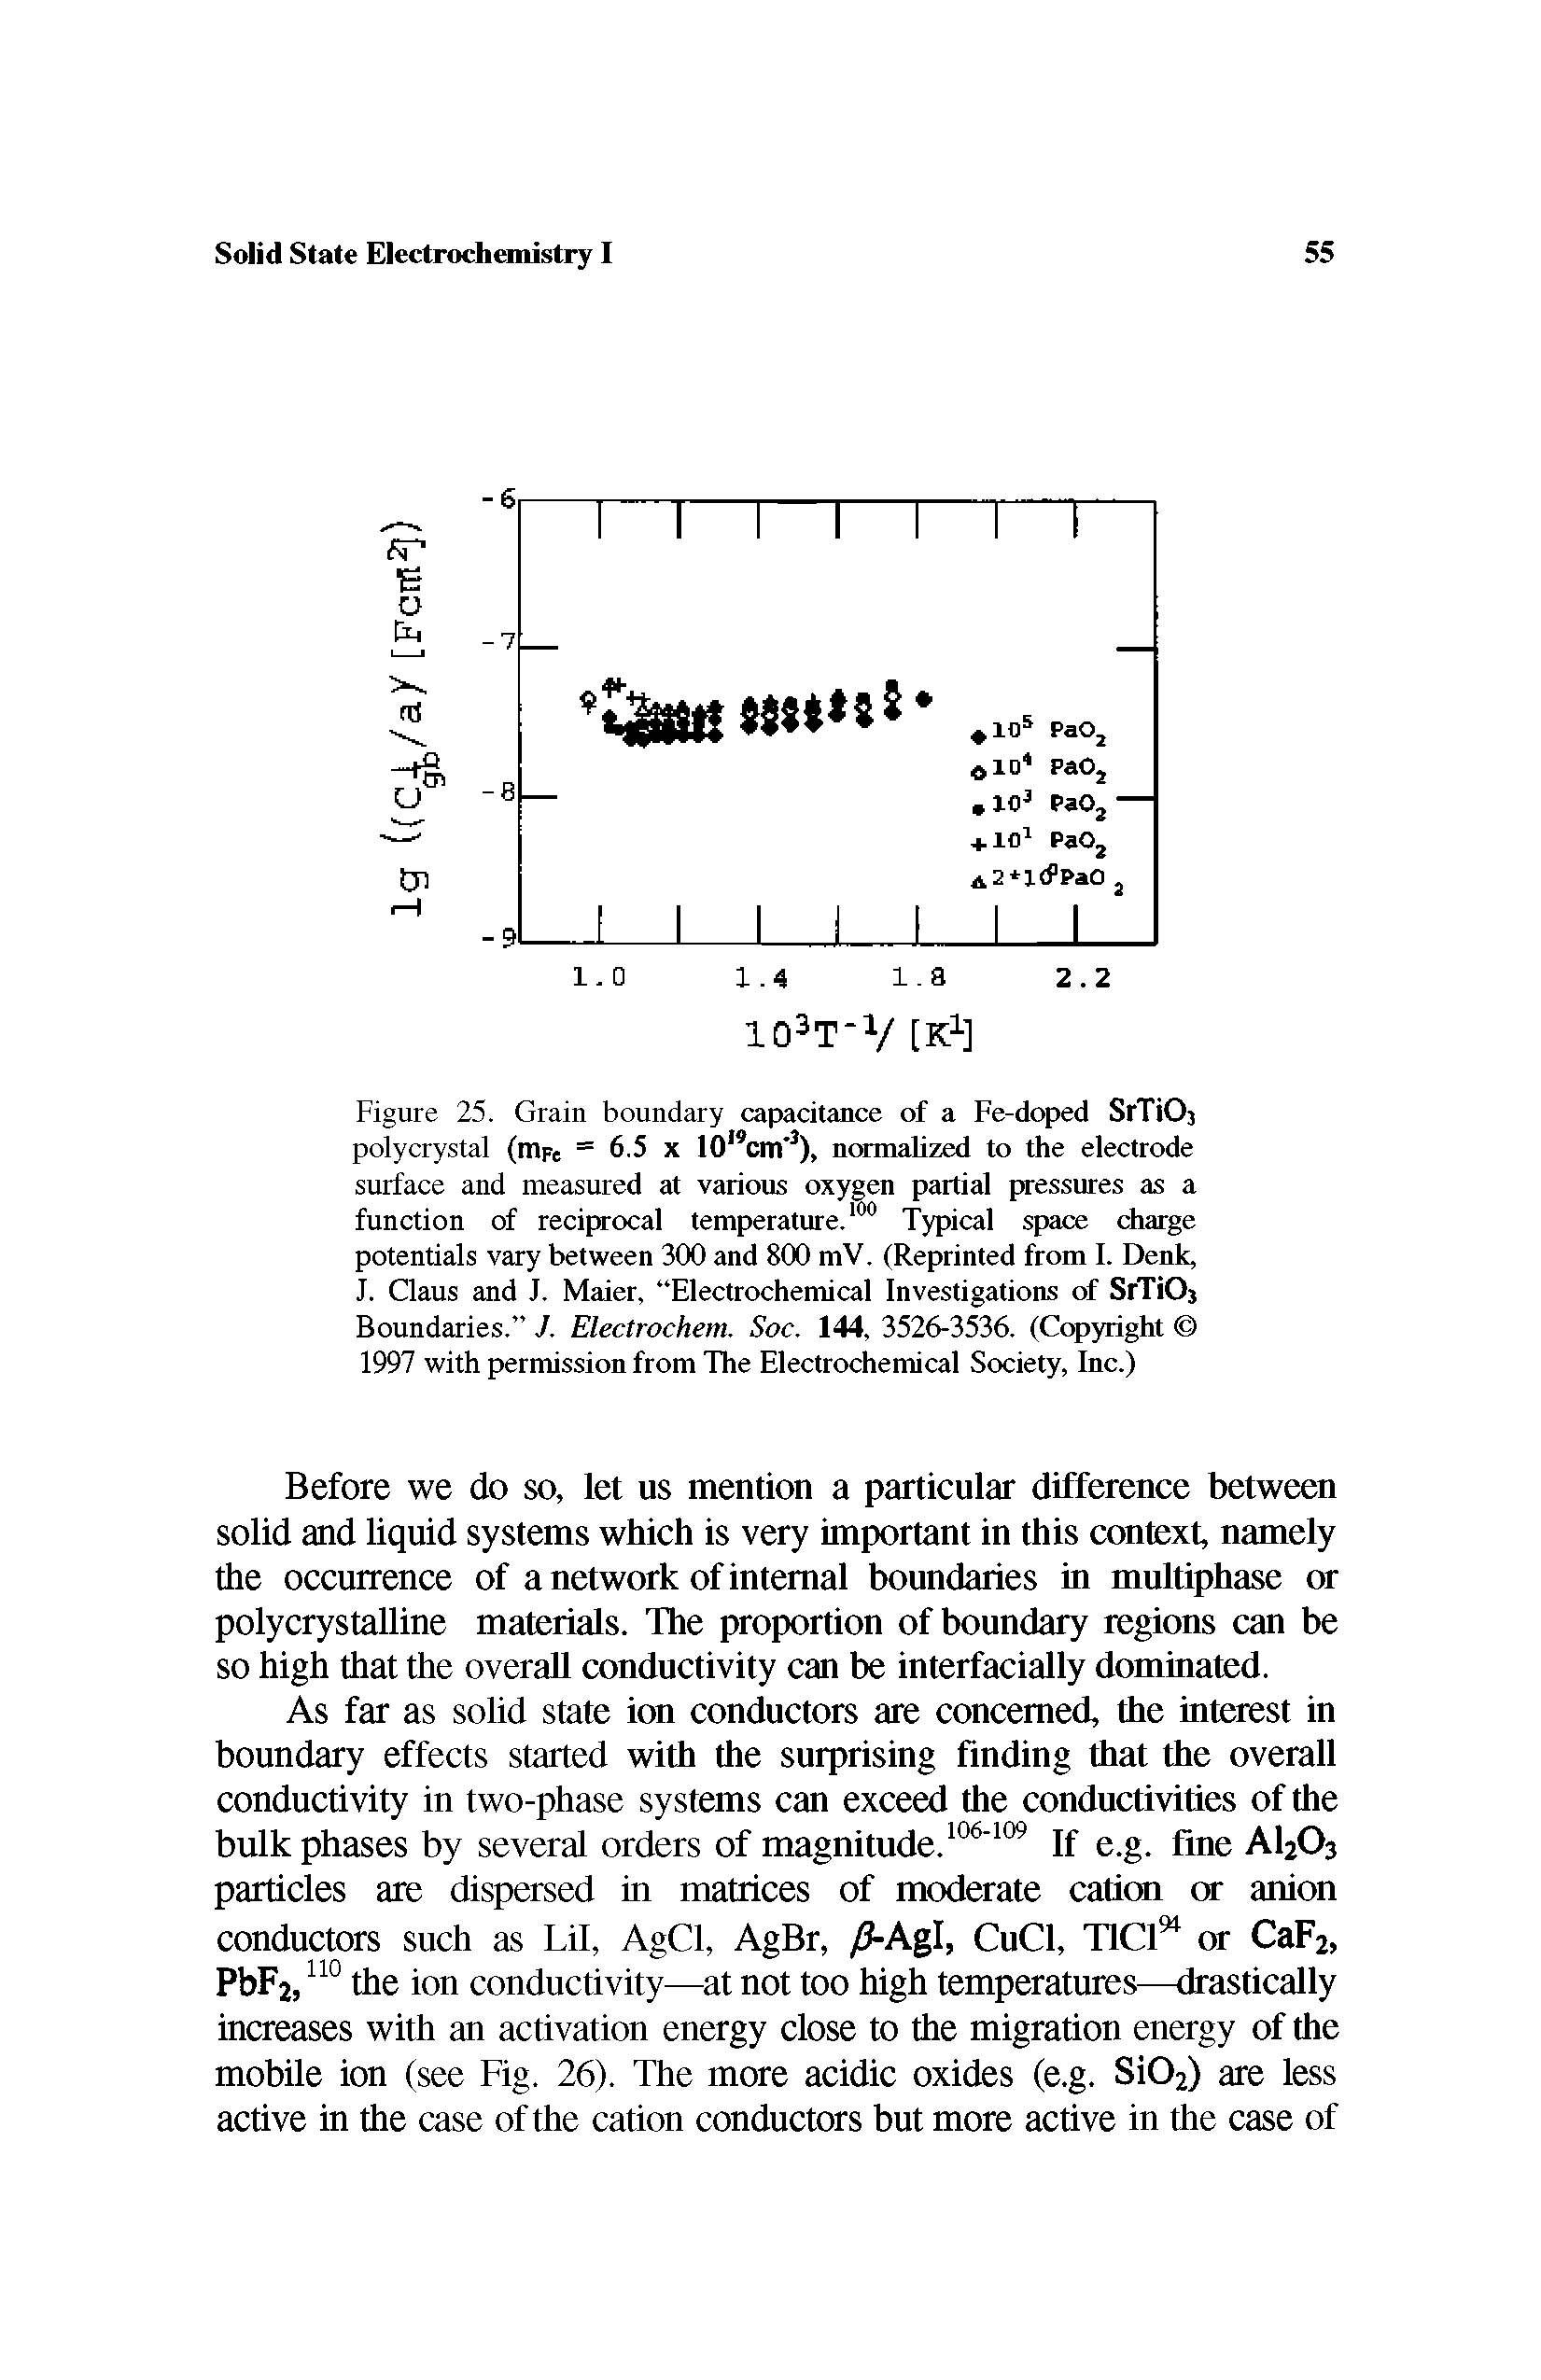 Figure 25. Grain boundary capacitance of a Fe-doped StTiOj polycrystal (rriFe = 6.5 x 10,9cm"3), normalized to the electrode surface and measured at various oxygen partial pressures as a function of reciprocal temperature.100 Typical space charge potentials vary between 300 and 800 mV. (Reprinted from I. Denk, J. Claus and J. Maier, Electrochemical Investigations of SrTiOj Boundaries. J. Electrochem. Soc. 144, 3526-3536. (Copyright 1997 with permission from The Electrochemical Society, Inc.)...